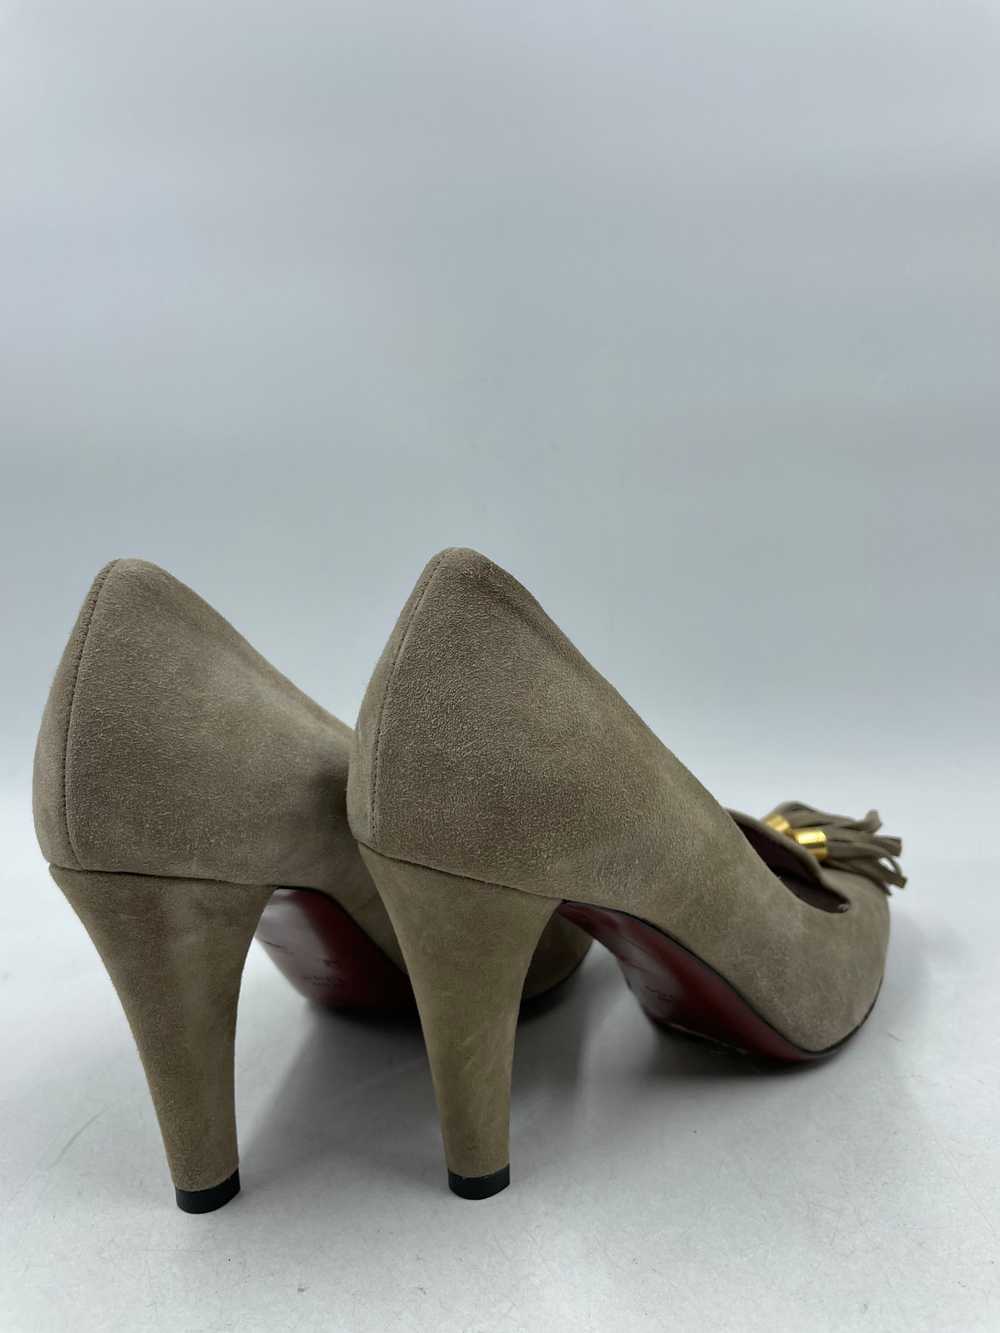 Authentic Gucci Taupe Tassel Pumps W 5.5 - image 4